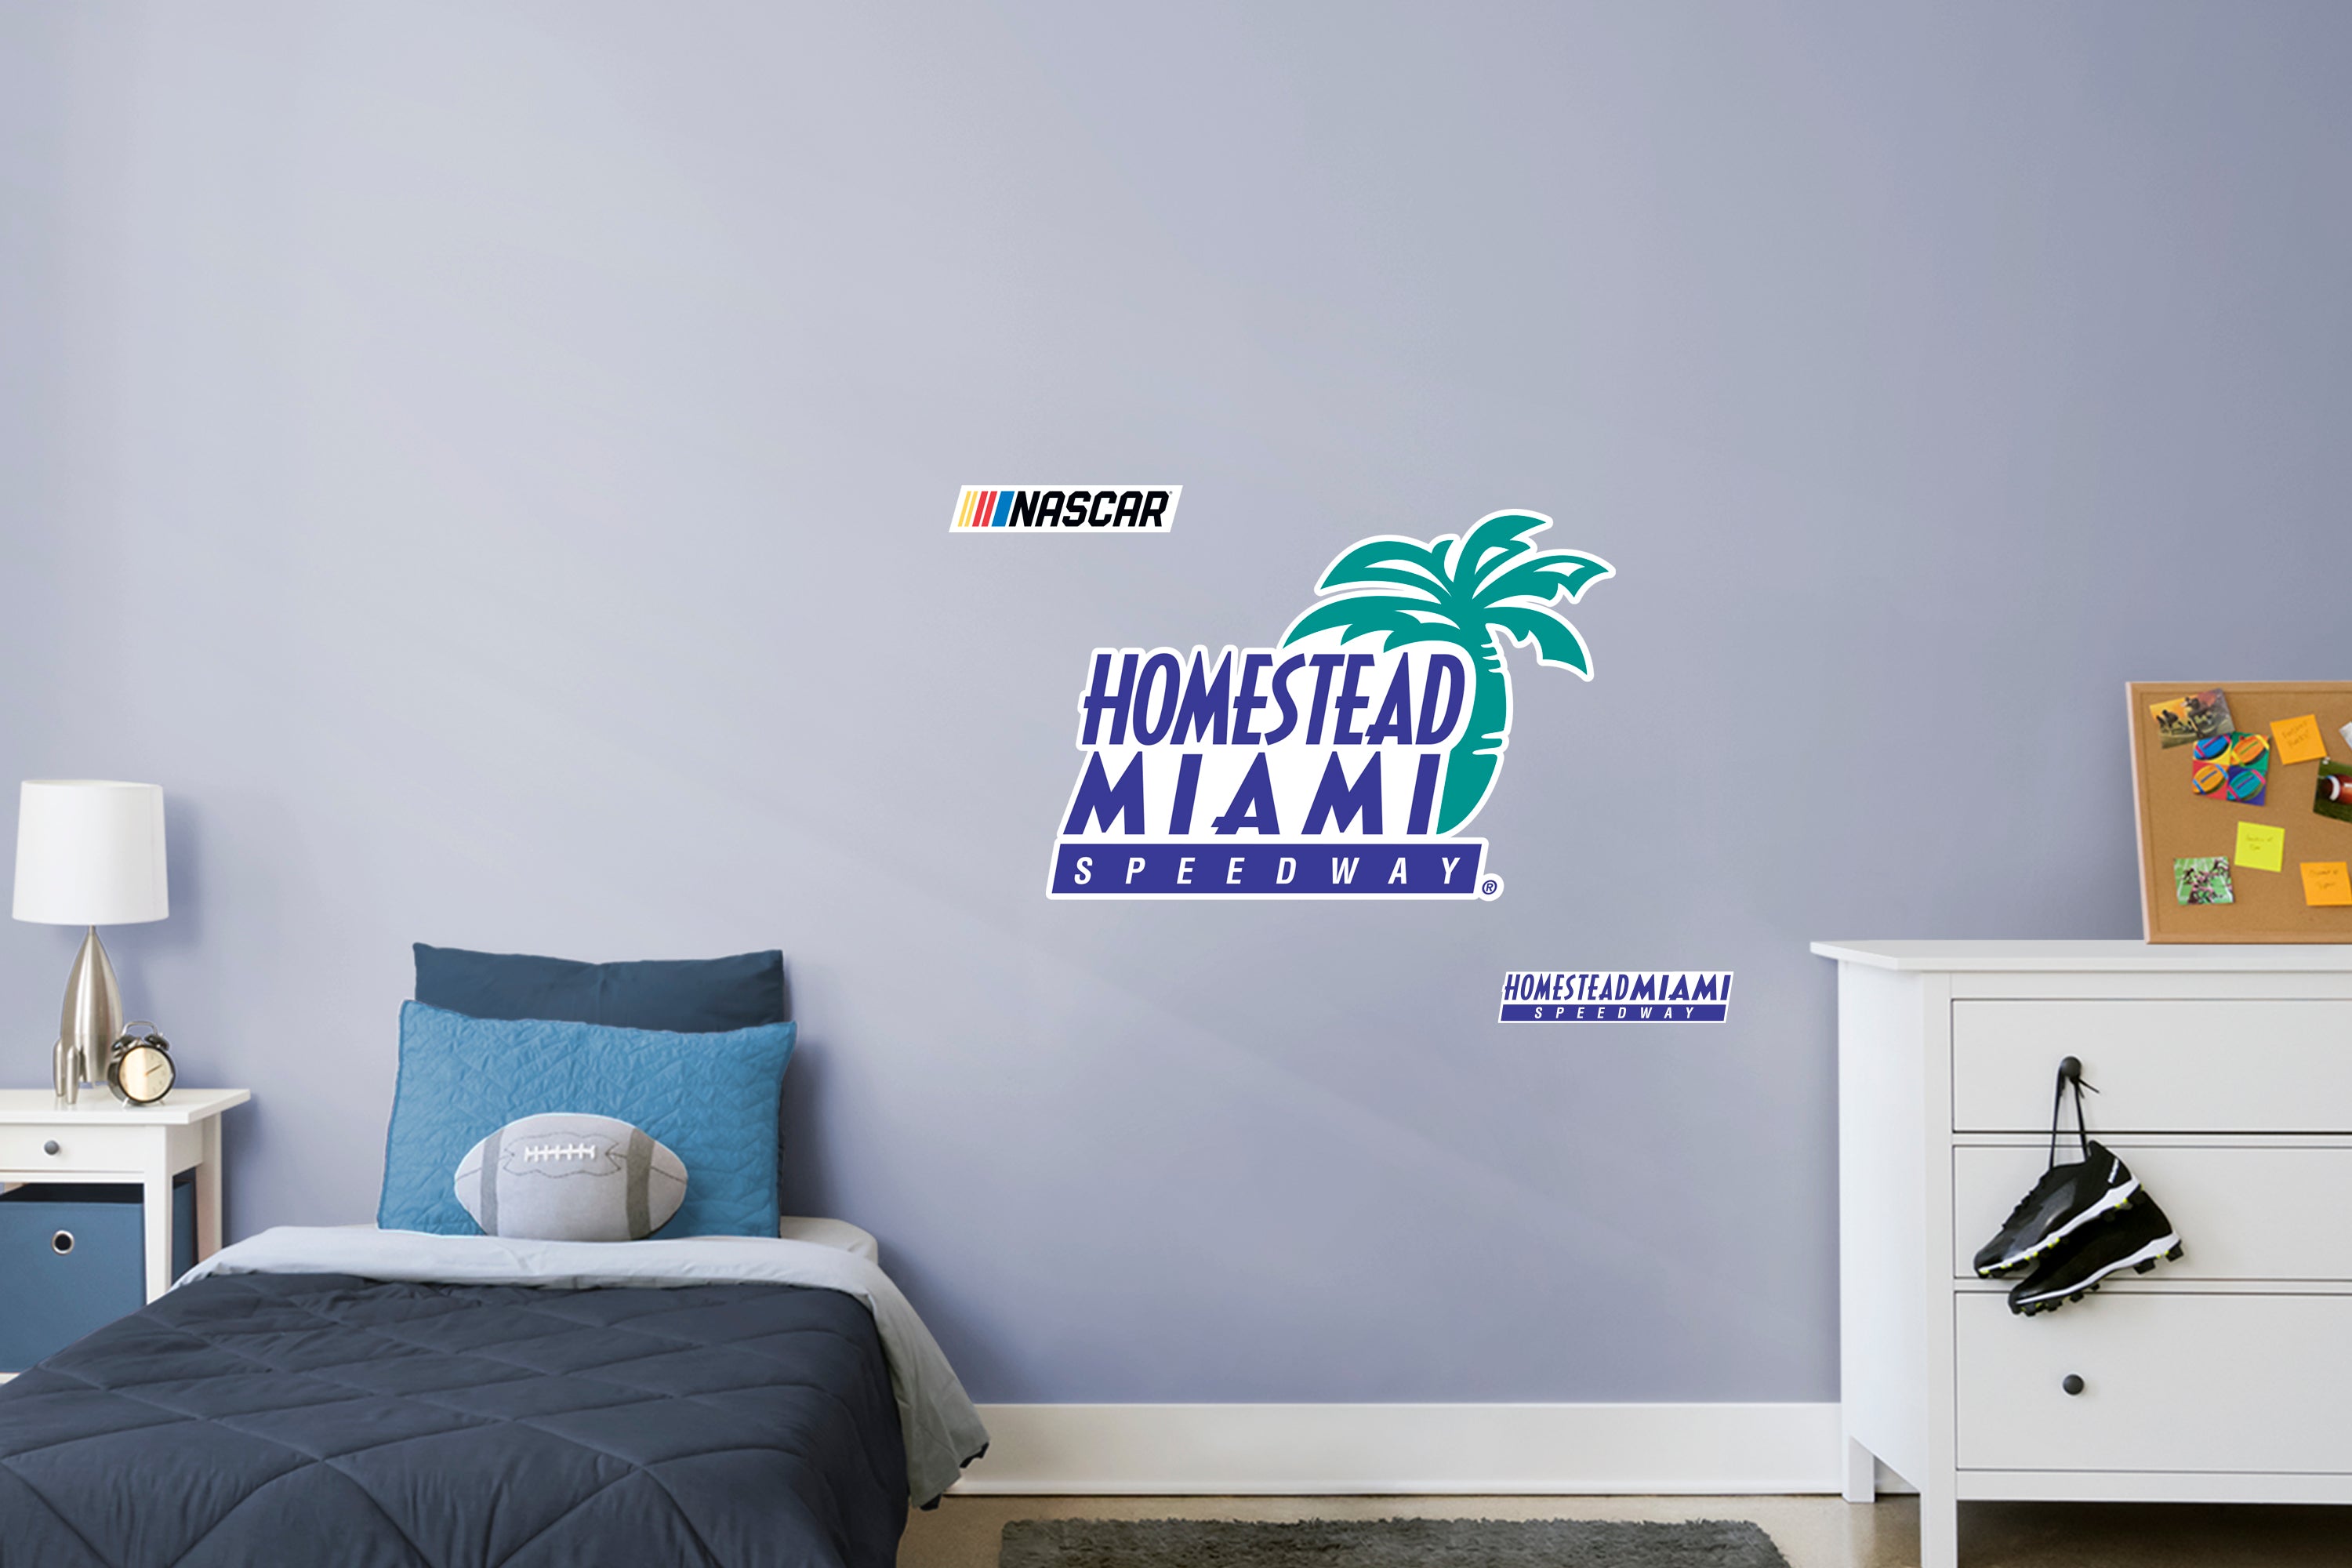 Homestead-Miami Speedway 2021 Logo - Officially Licensed NASCAR Removable Wall Decal XL by Fathead | Vinyl